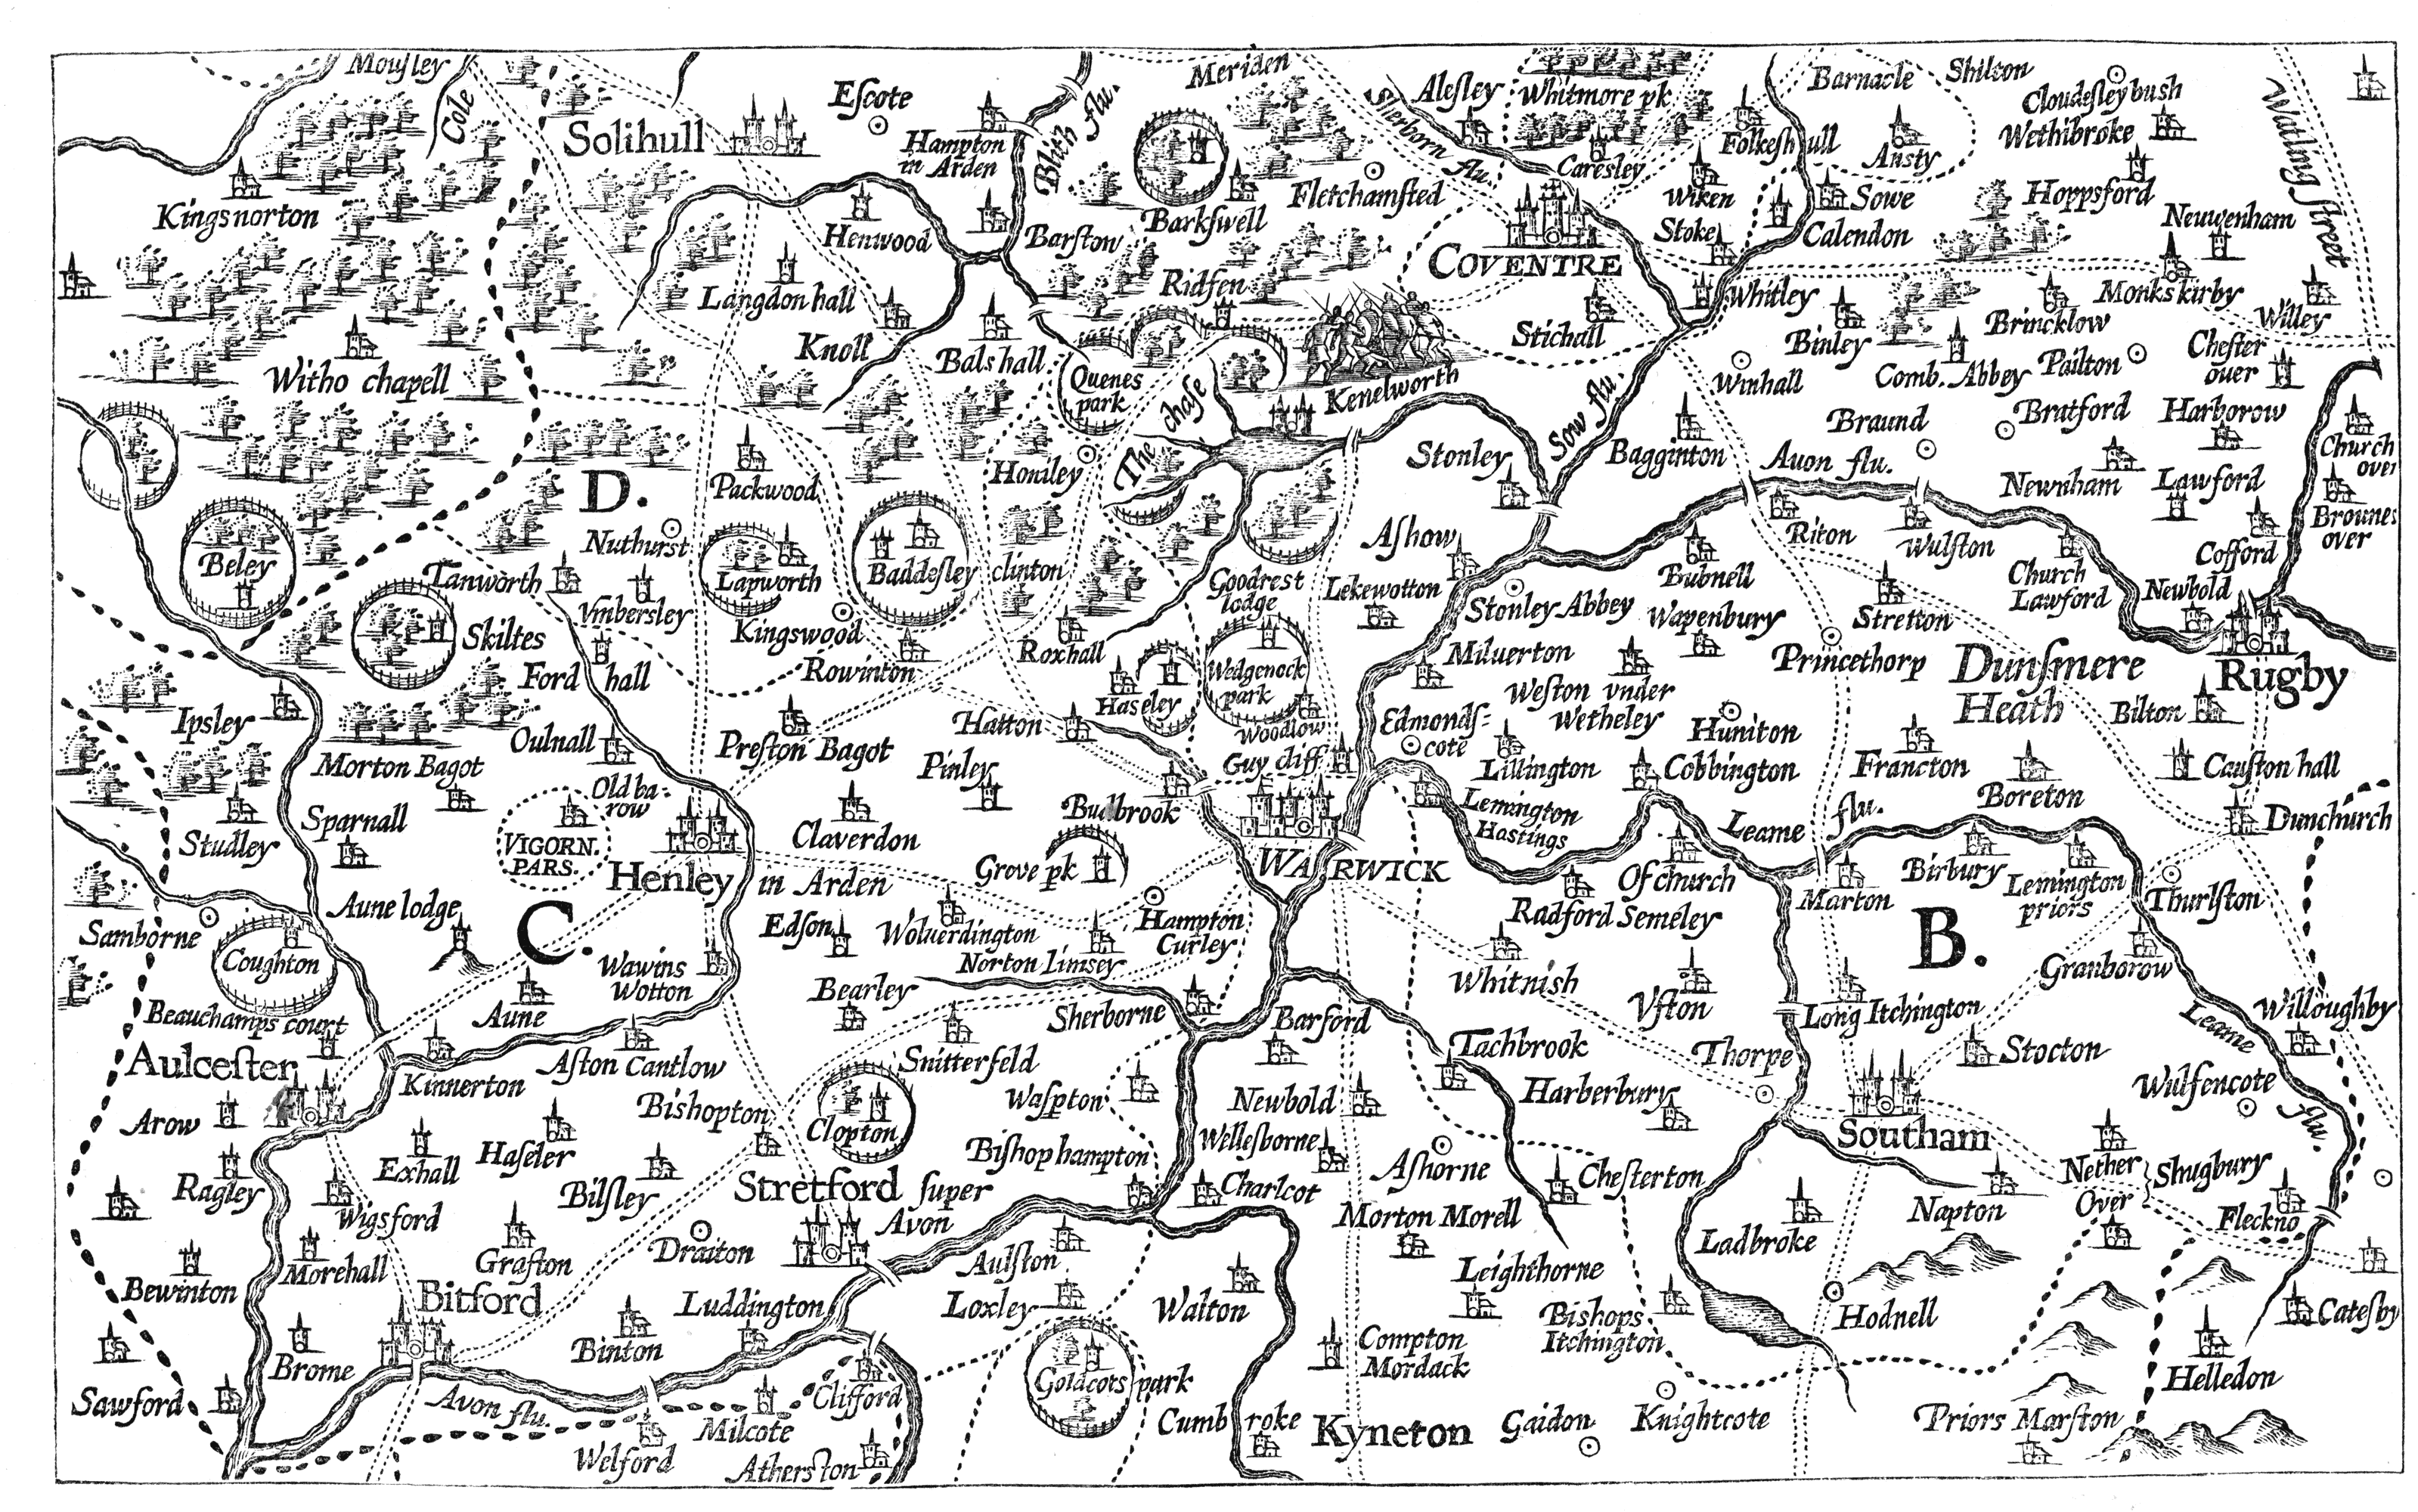 Map of Warwickshire engraved in 1603.  From James Halliwell 'Illustrations of the life of Shakespeare' (1874), page 63, published size in Halliwell 24.6cm wide by 15.1cm high.